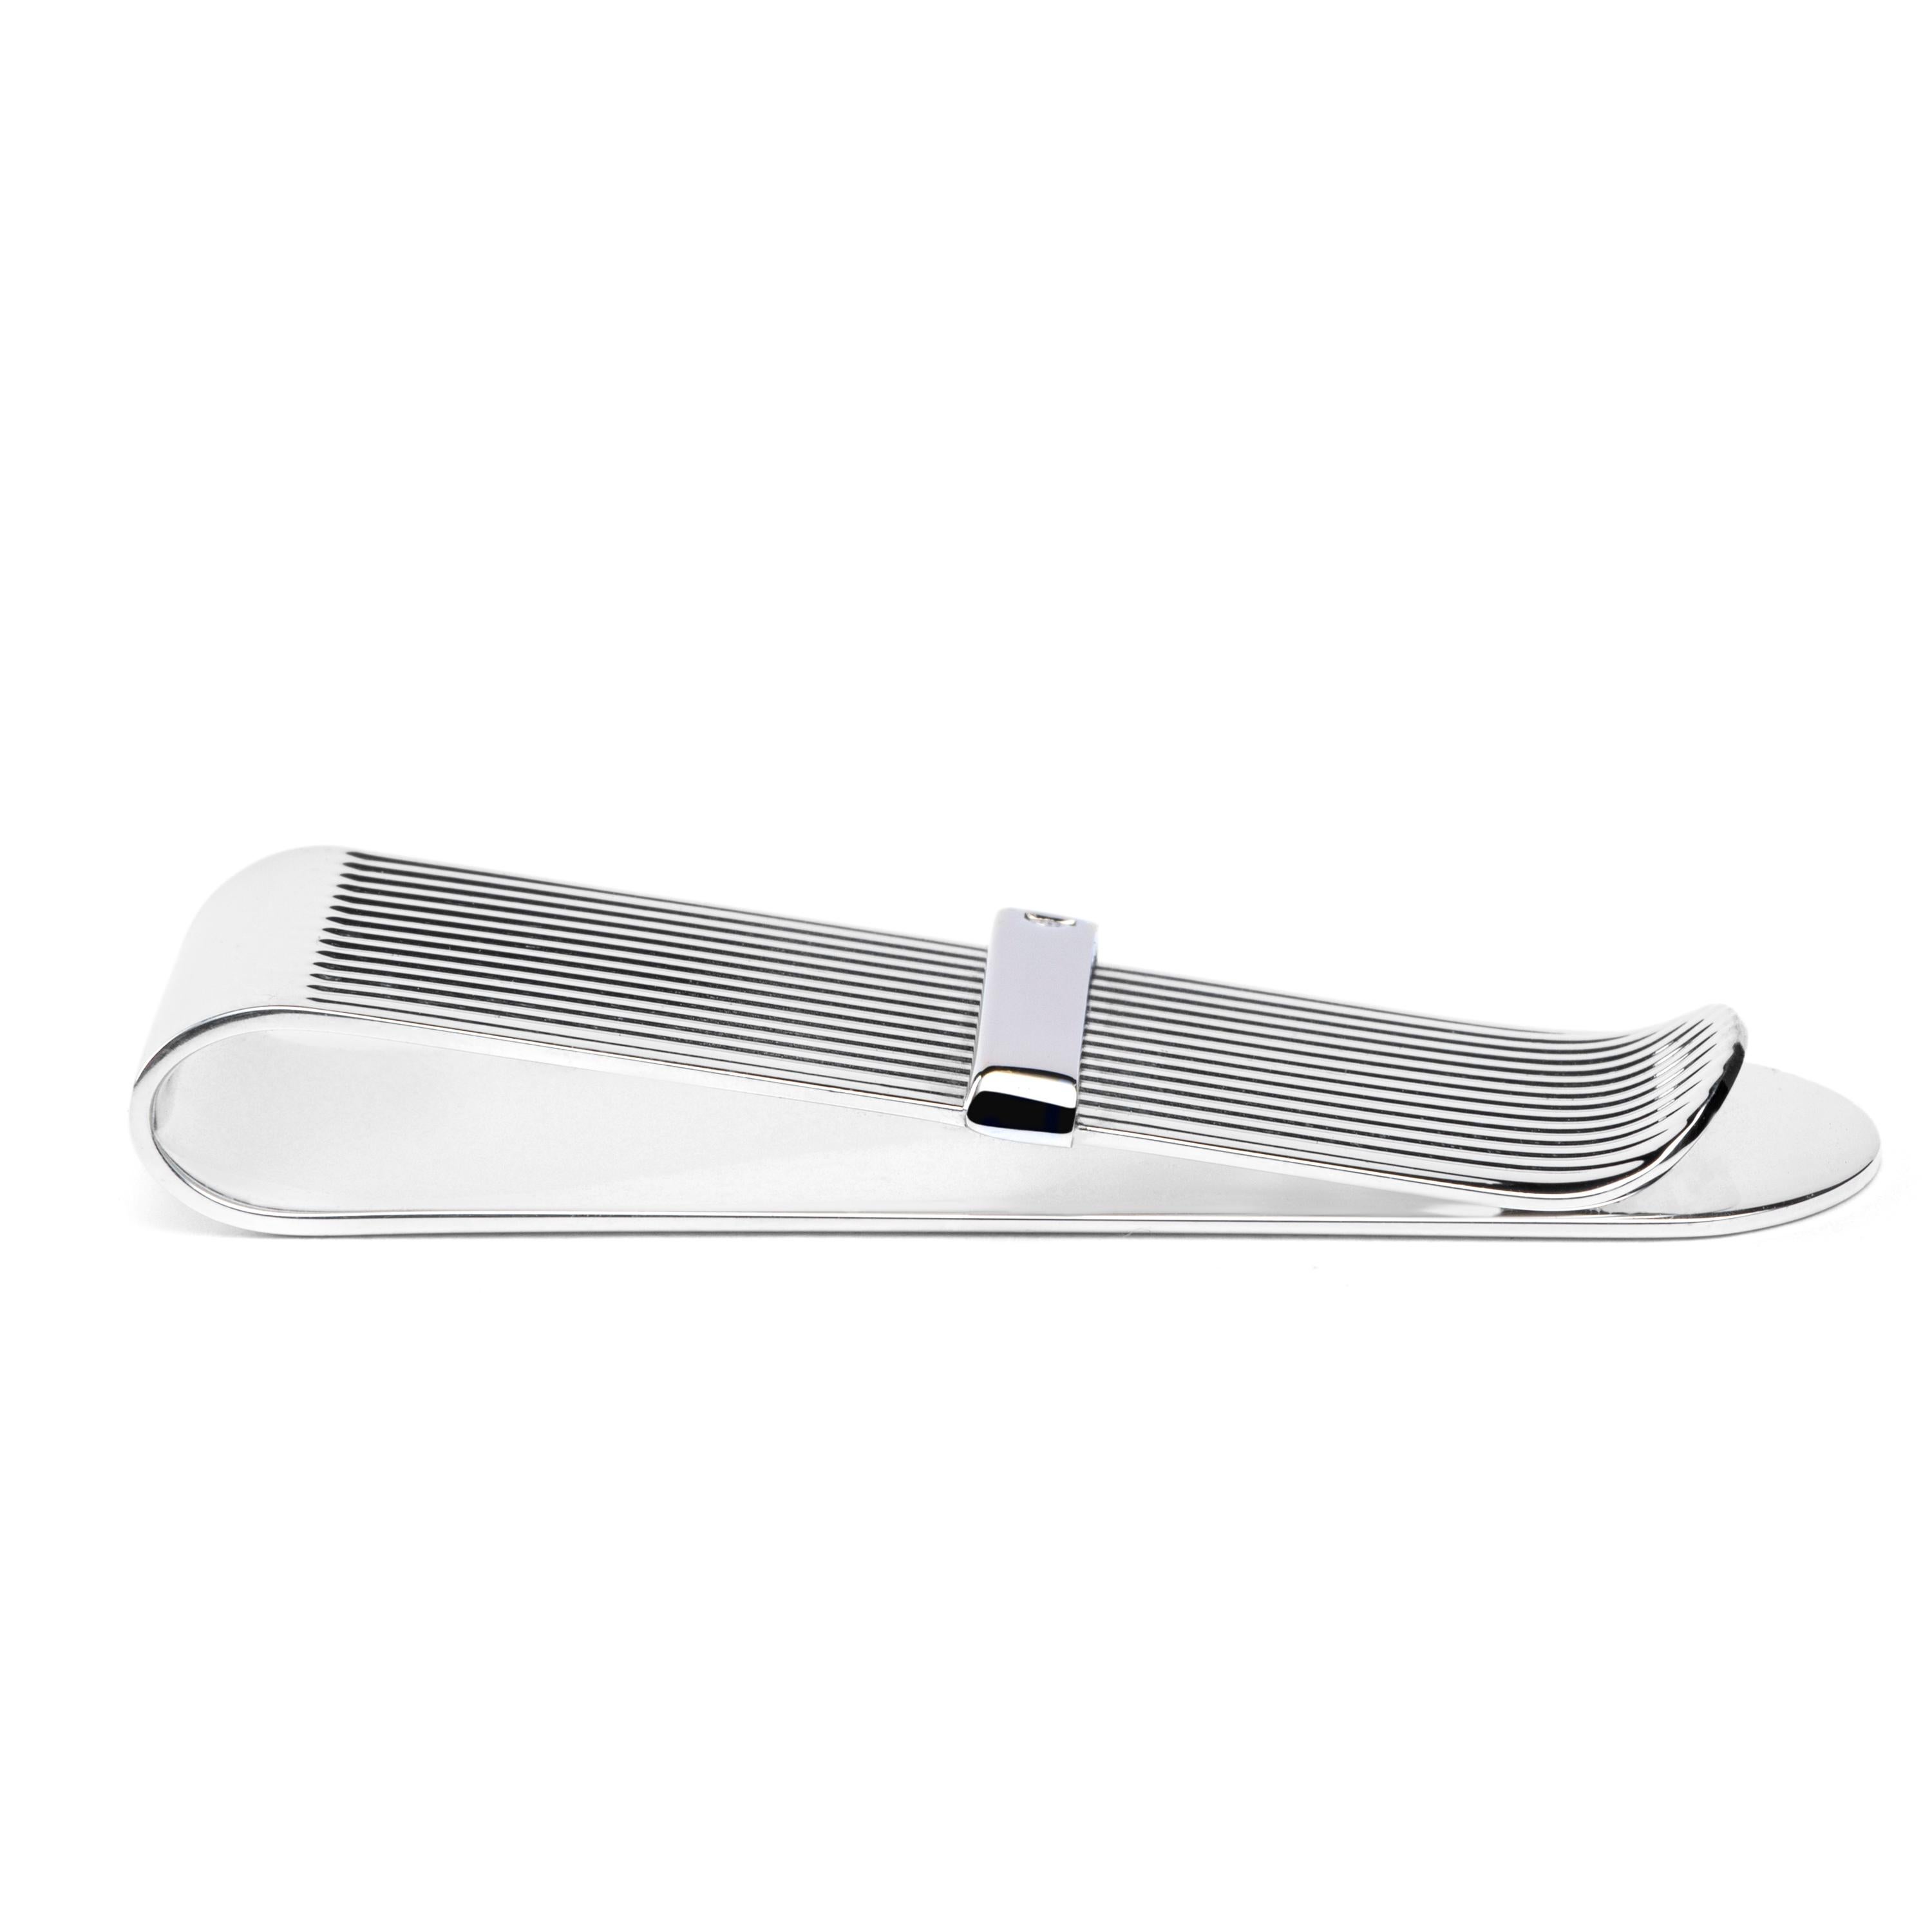 Alex Jona hand crafted in Italy, rhodium plated Sterling Silver money clip.
Dimensions: 2.22 in. L x 0.90 in. W x 0.32 in. D - 56 mm. L x 22 mm. W x 8 mm. D.
All Jona jewelry is new and has never been previously owned or worn. Each item will arrive